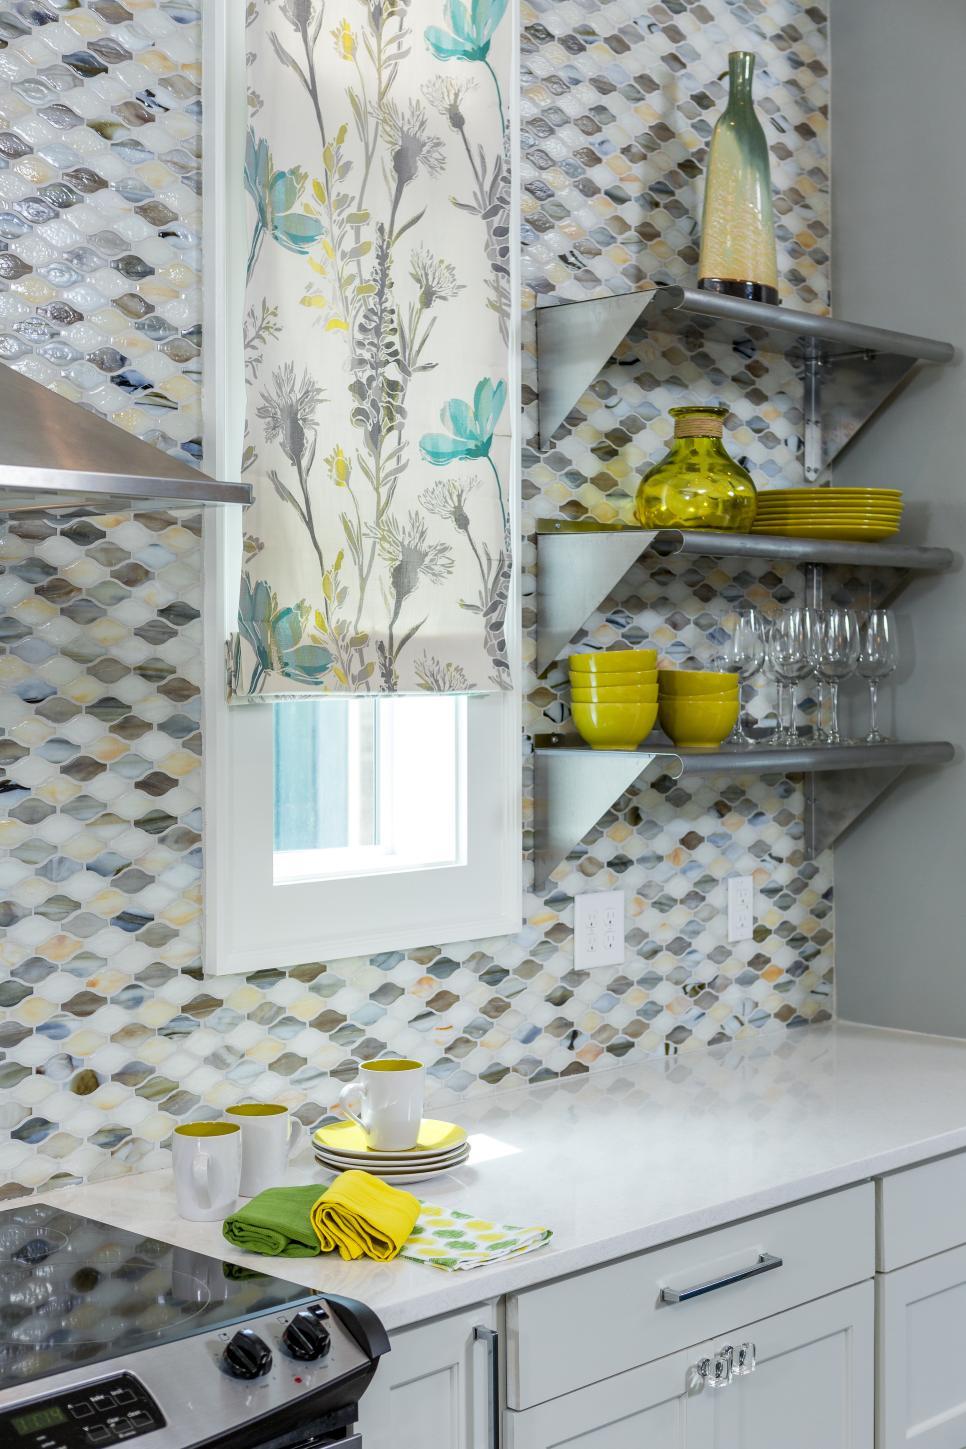 Eclectic Kitchen with Gray, Yellow and White Tile and Art | HGTV